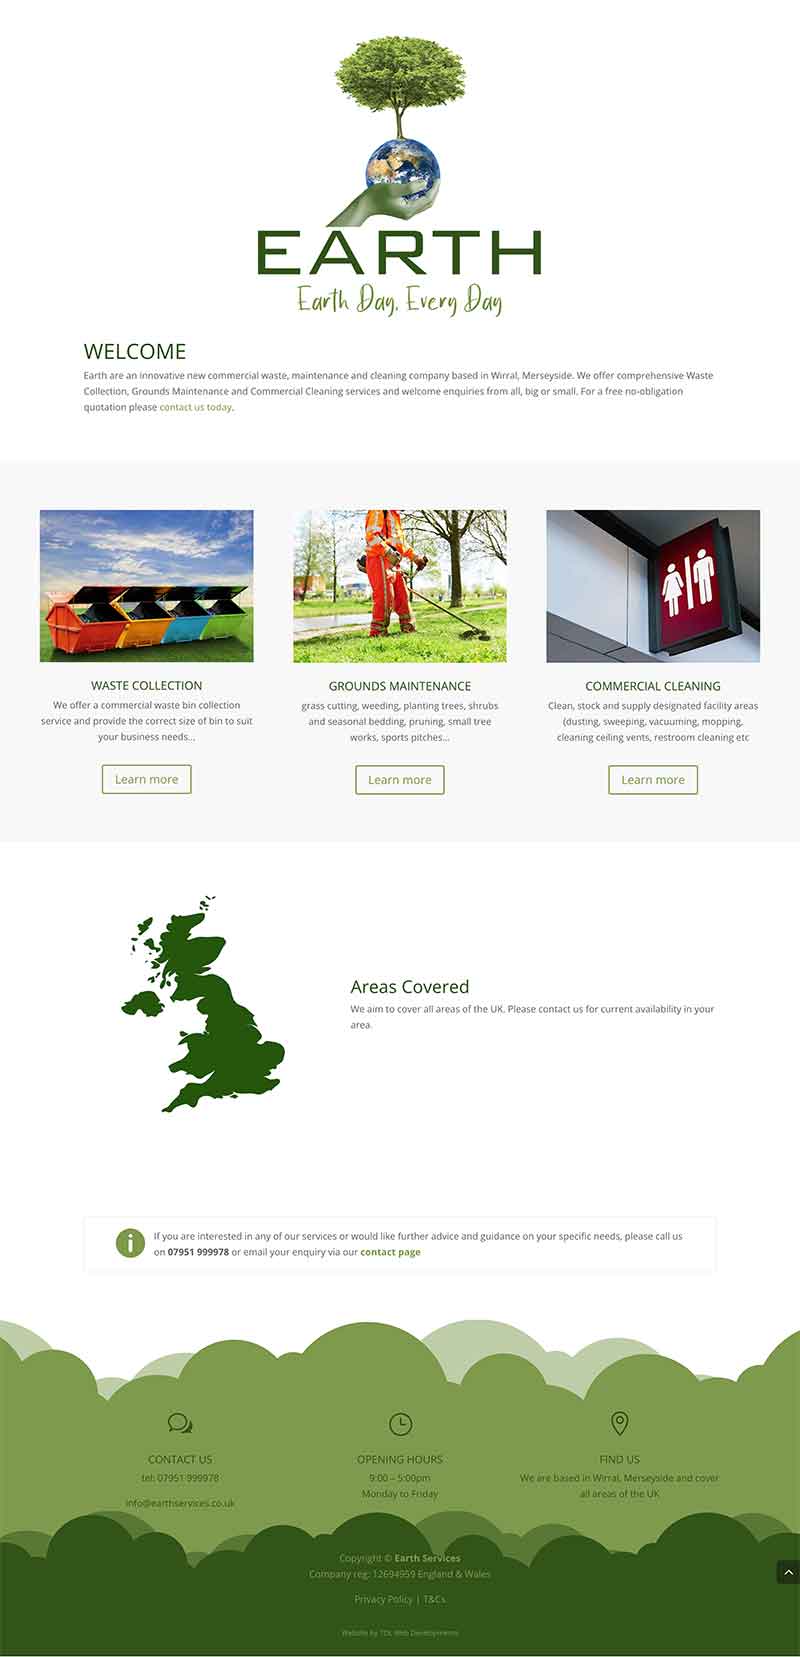 Earth Services home page screenshot